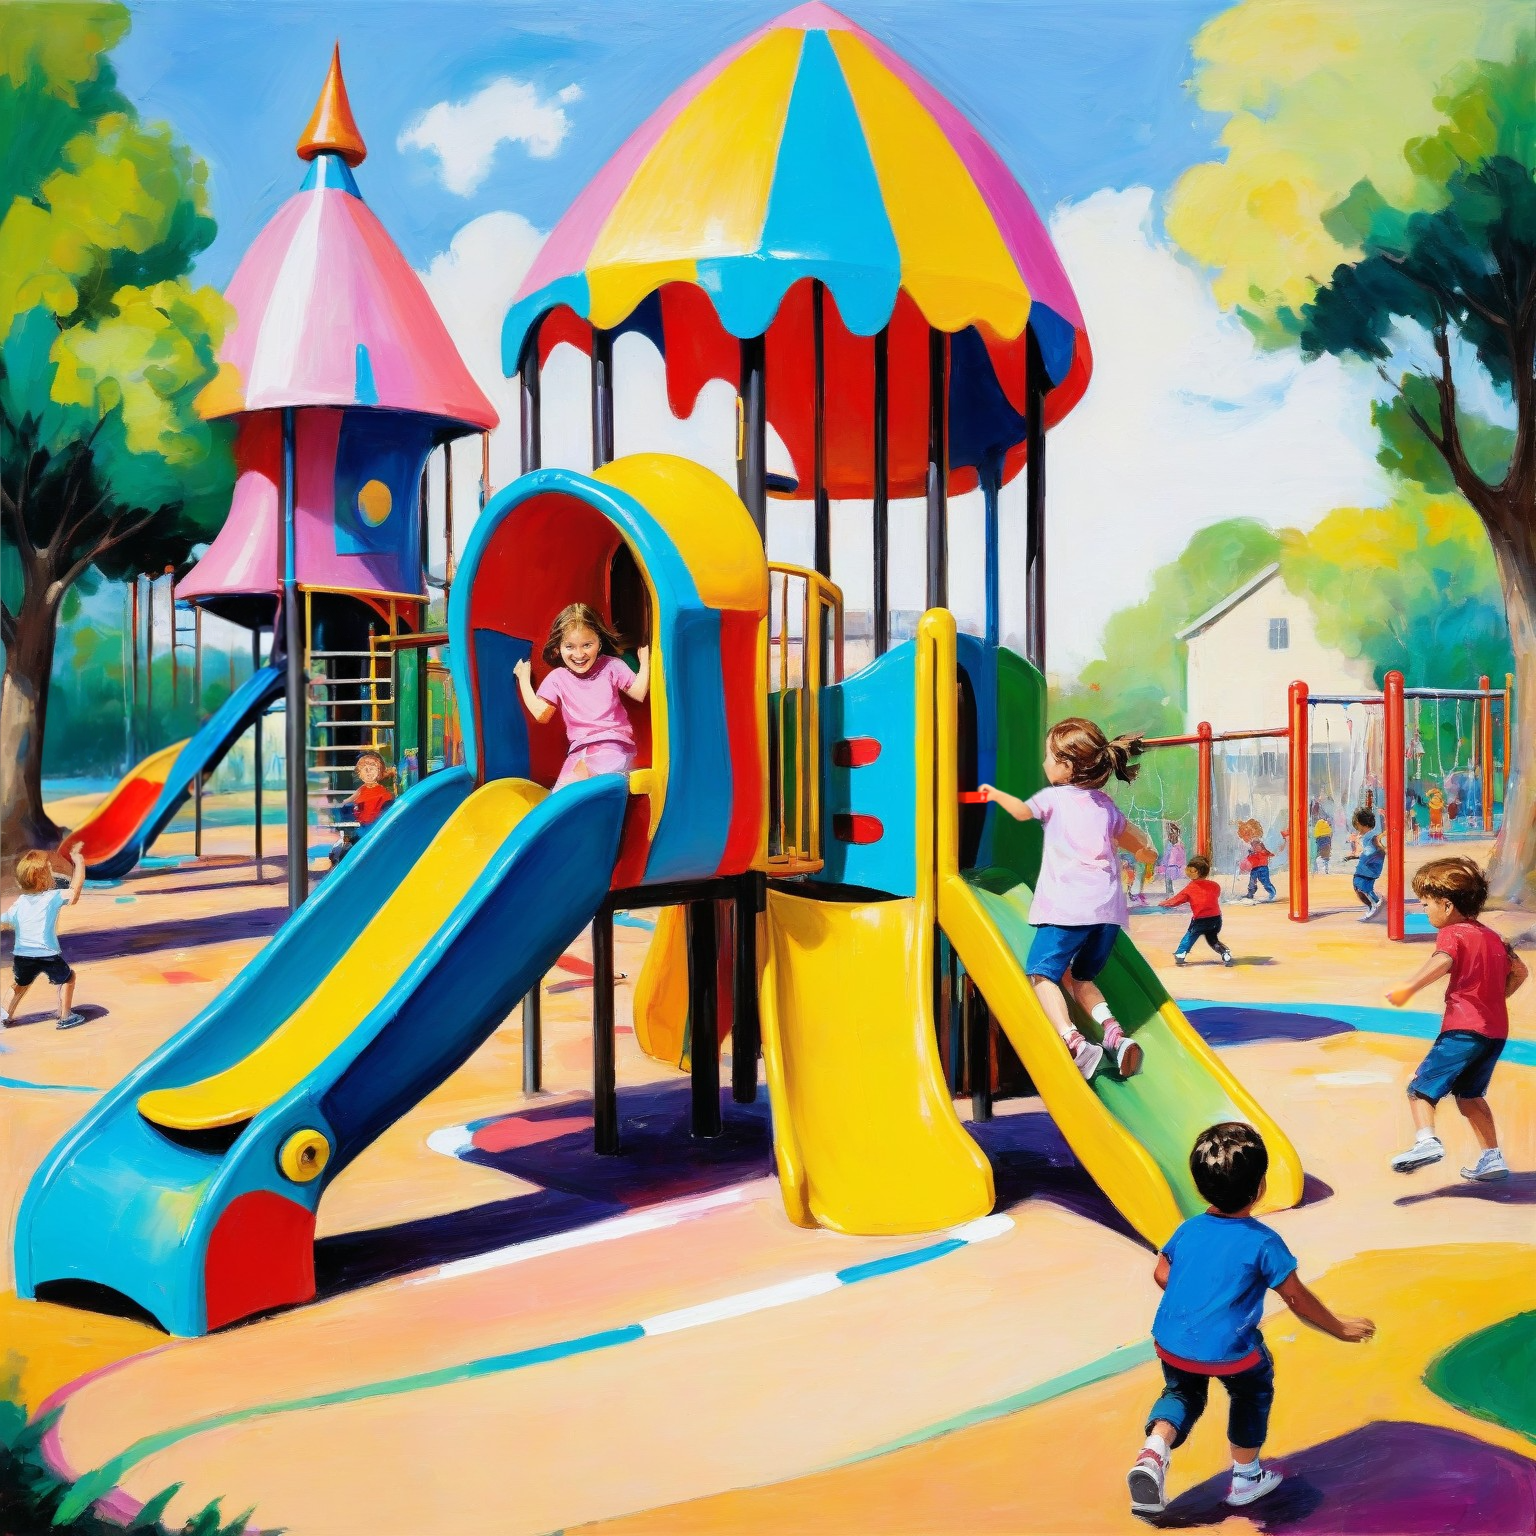 pikaso_texttoimage_Oil-painting-A-colorful-drawing-of-children-playin.png